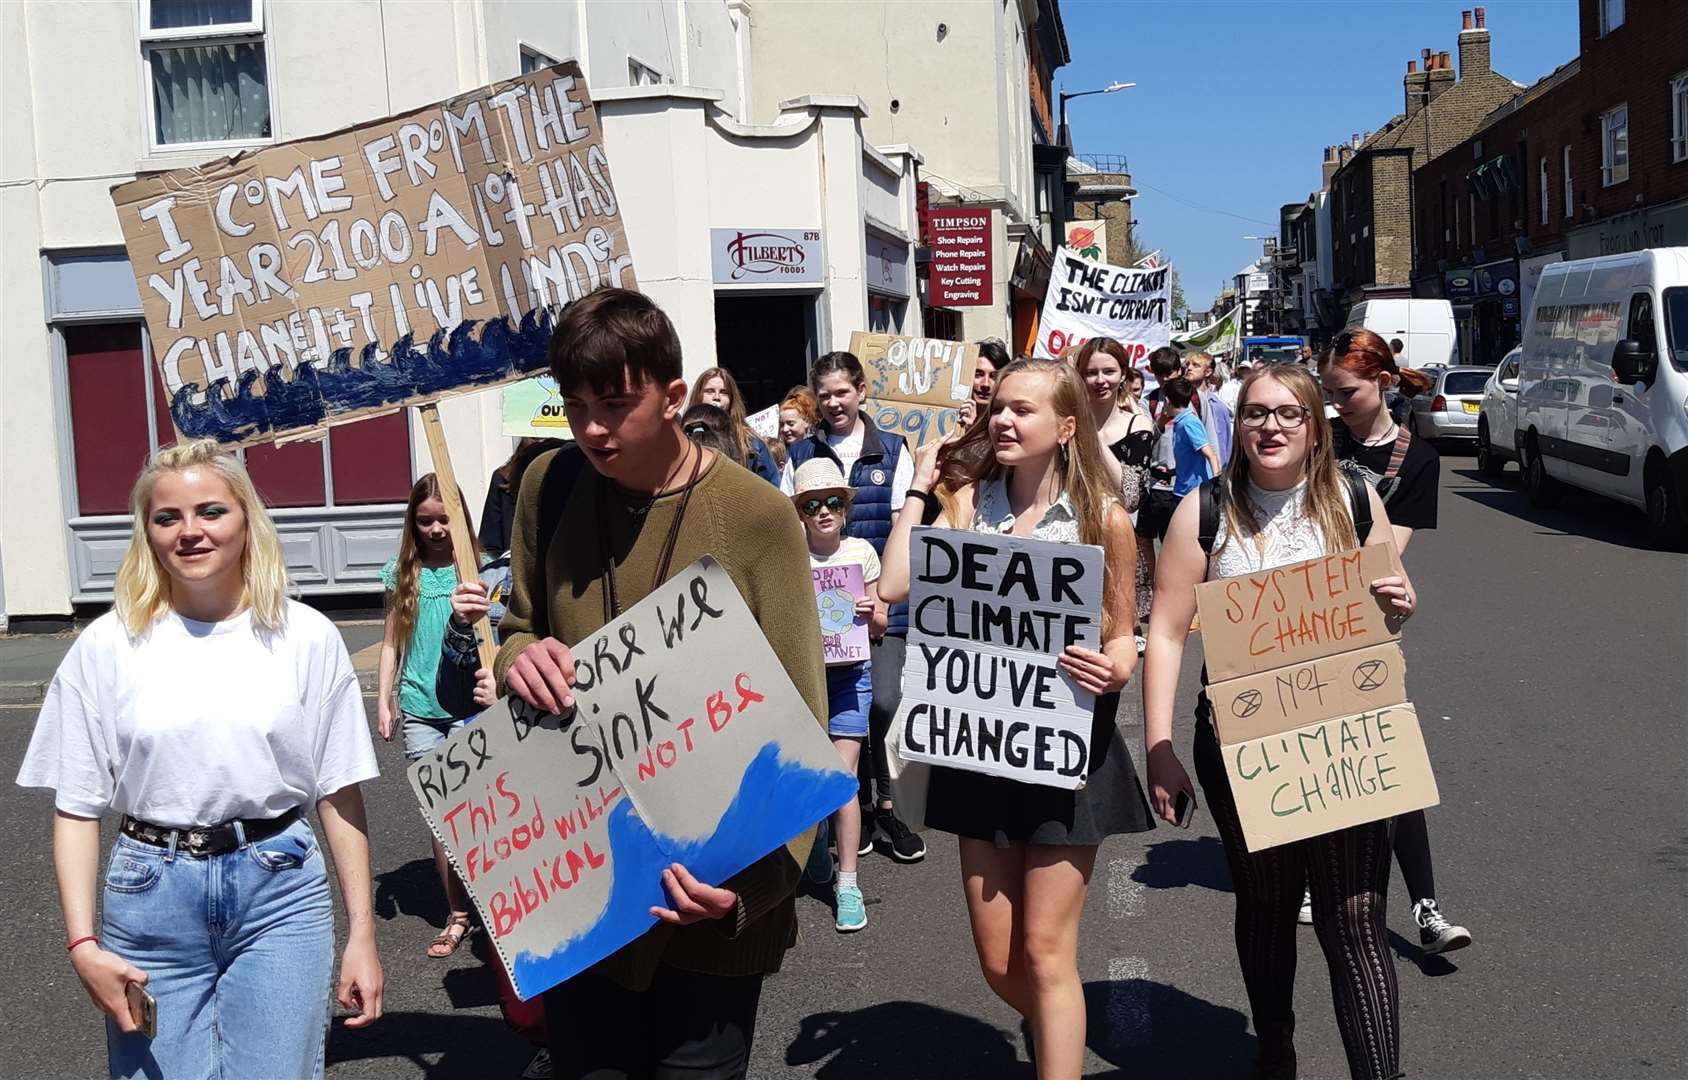 Sam Brookfield and Millie Manners lead the march